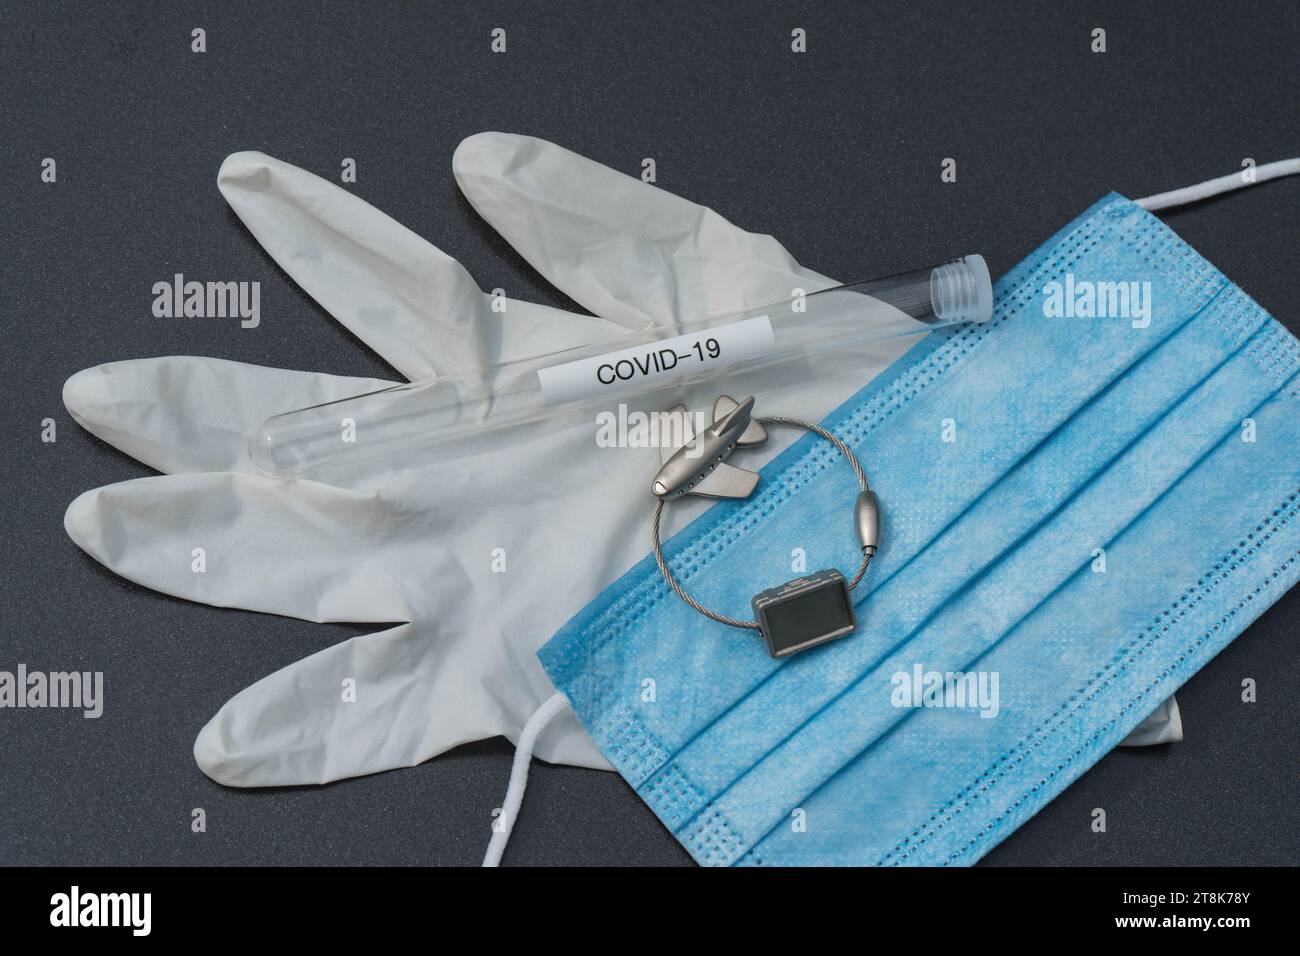 latex glove, test tubule, mask, and luggage tag with plane, flight voyage under Corona conditions Stock Photo